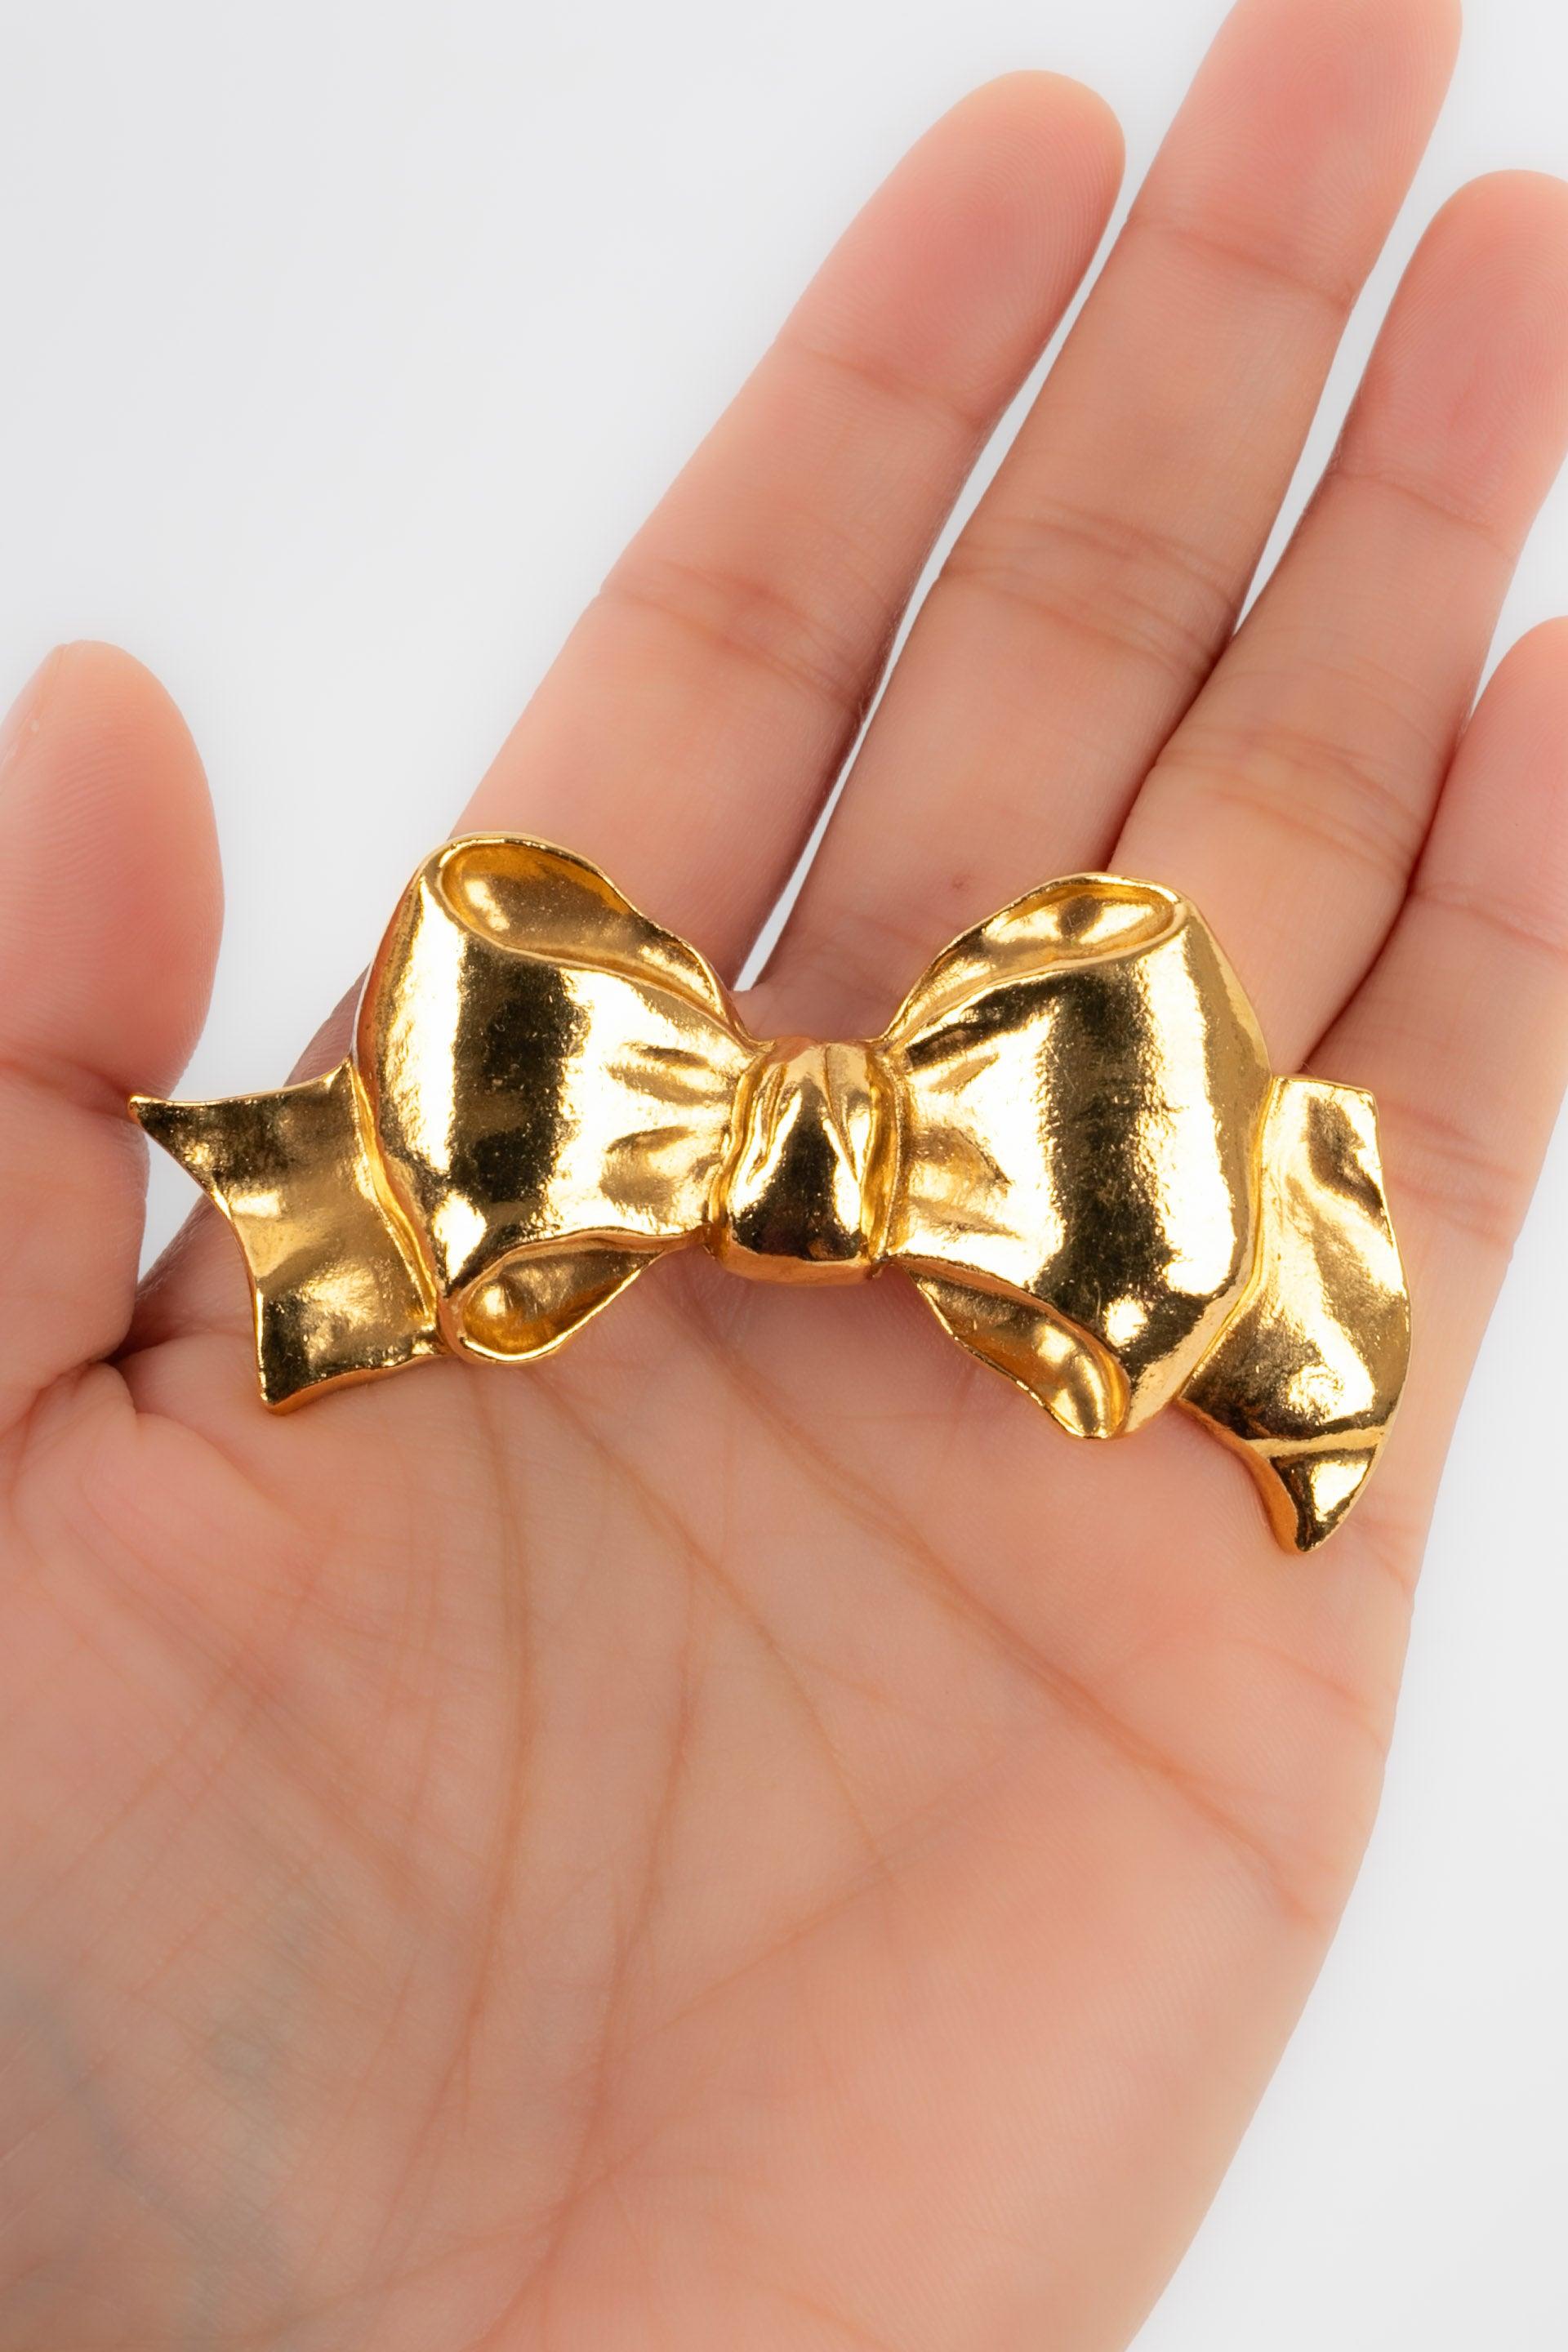 Chanel Bow Brooch in Gold-Plated Metal Representing a Bow, 1990s For Sale 2